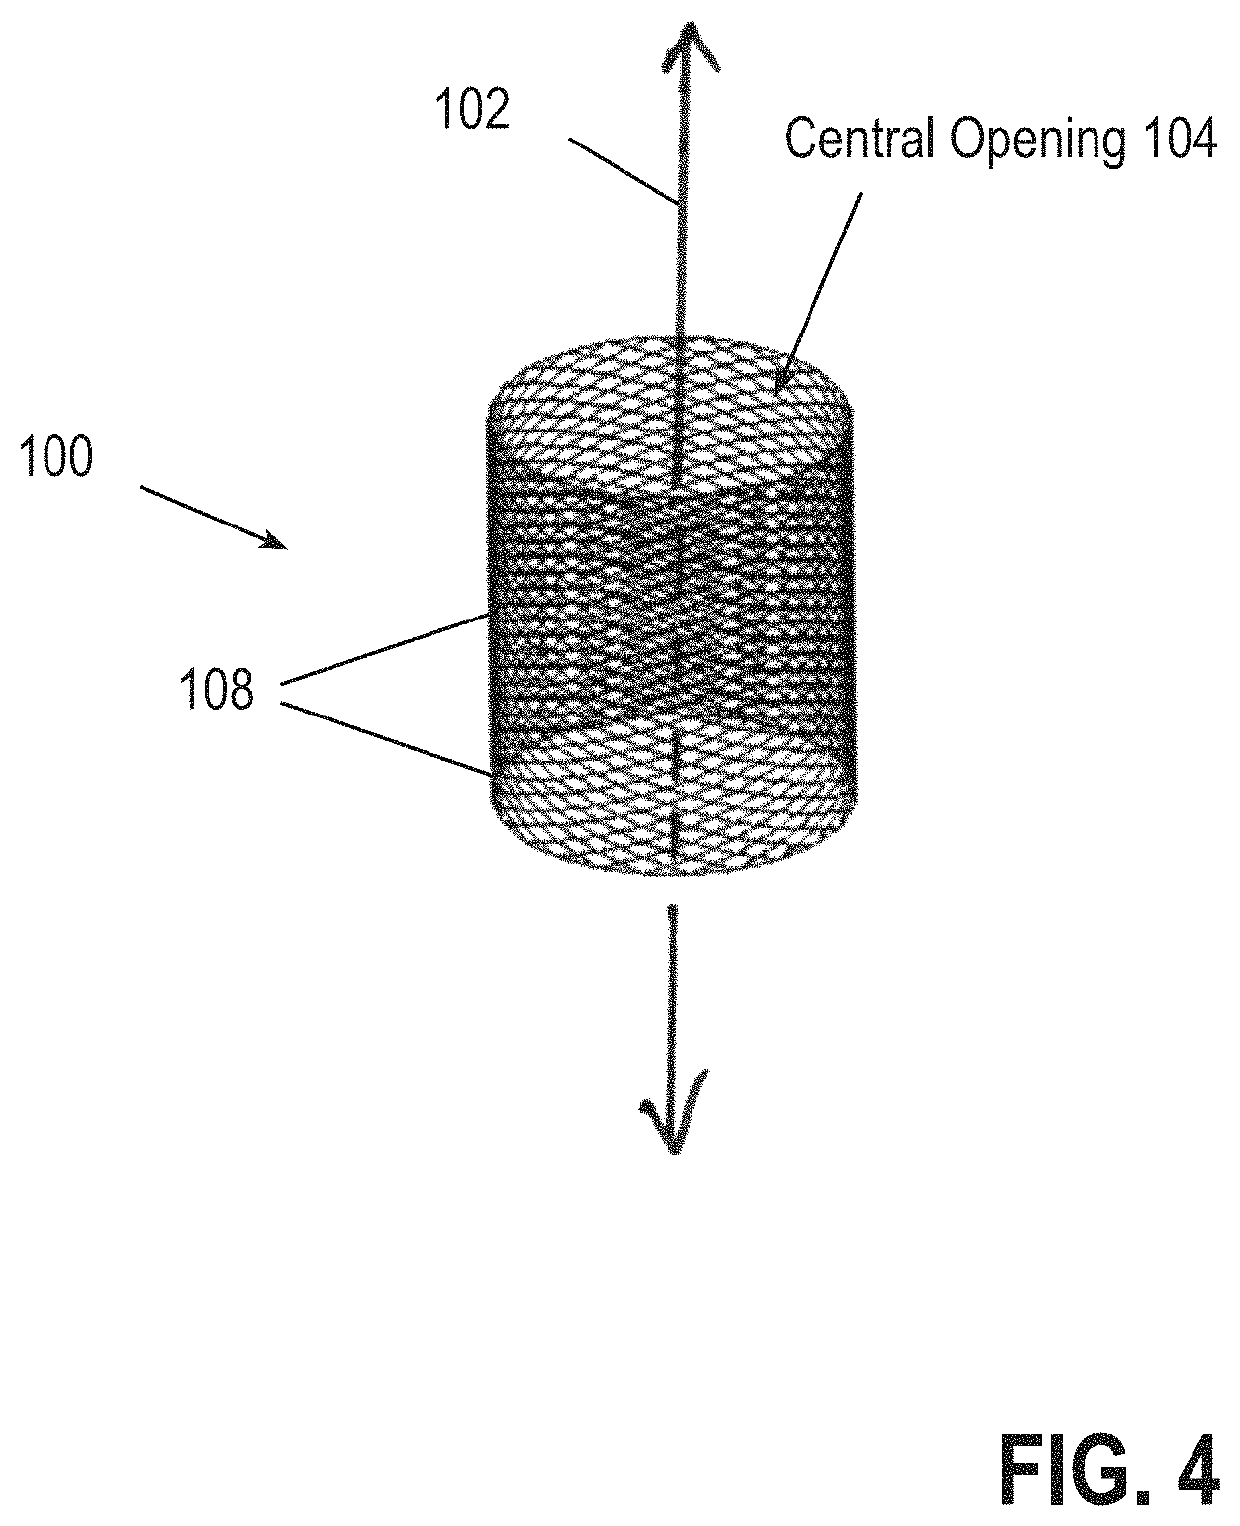 Multi-axially braided reinforcement sleeve for concrete columns and method for constructing concrete columns